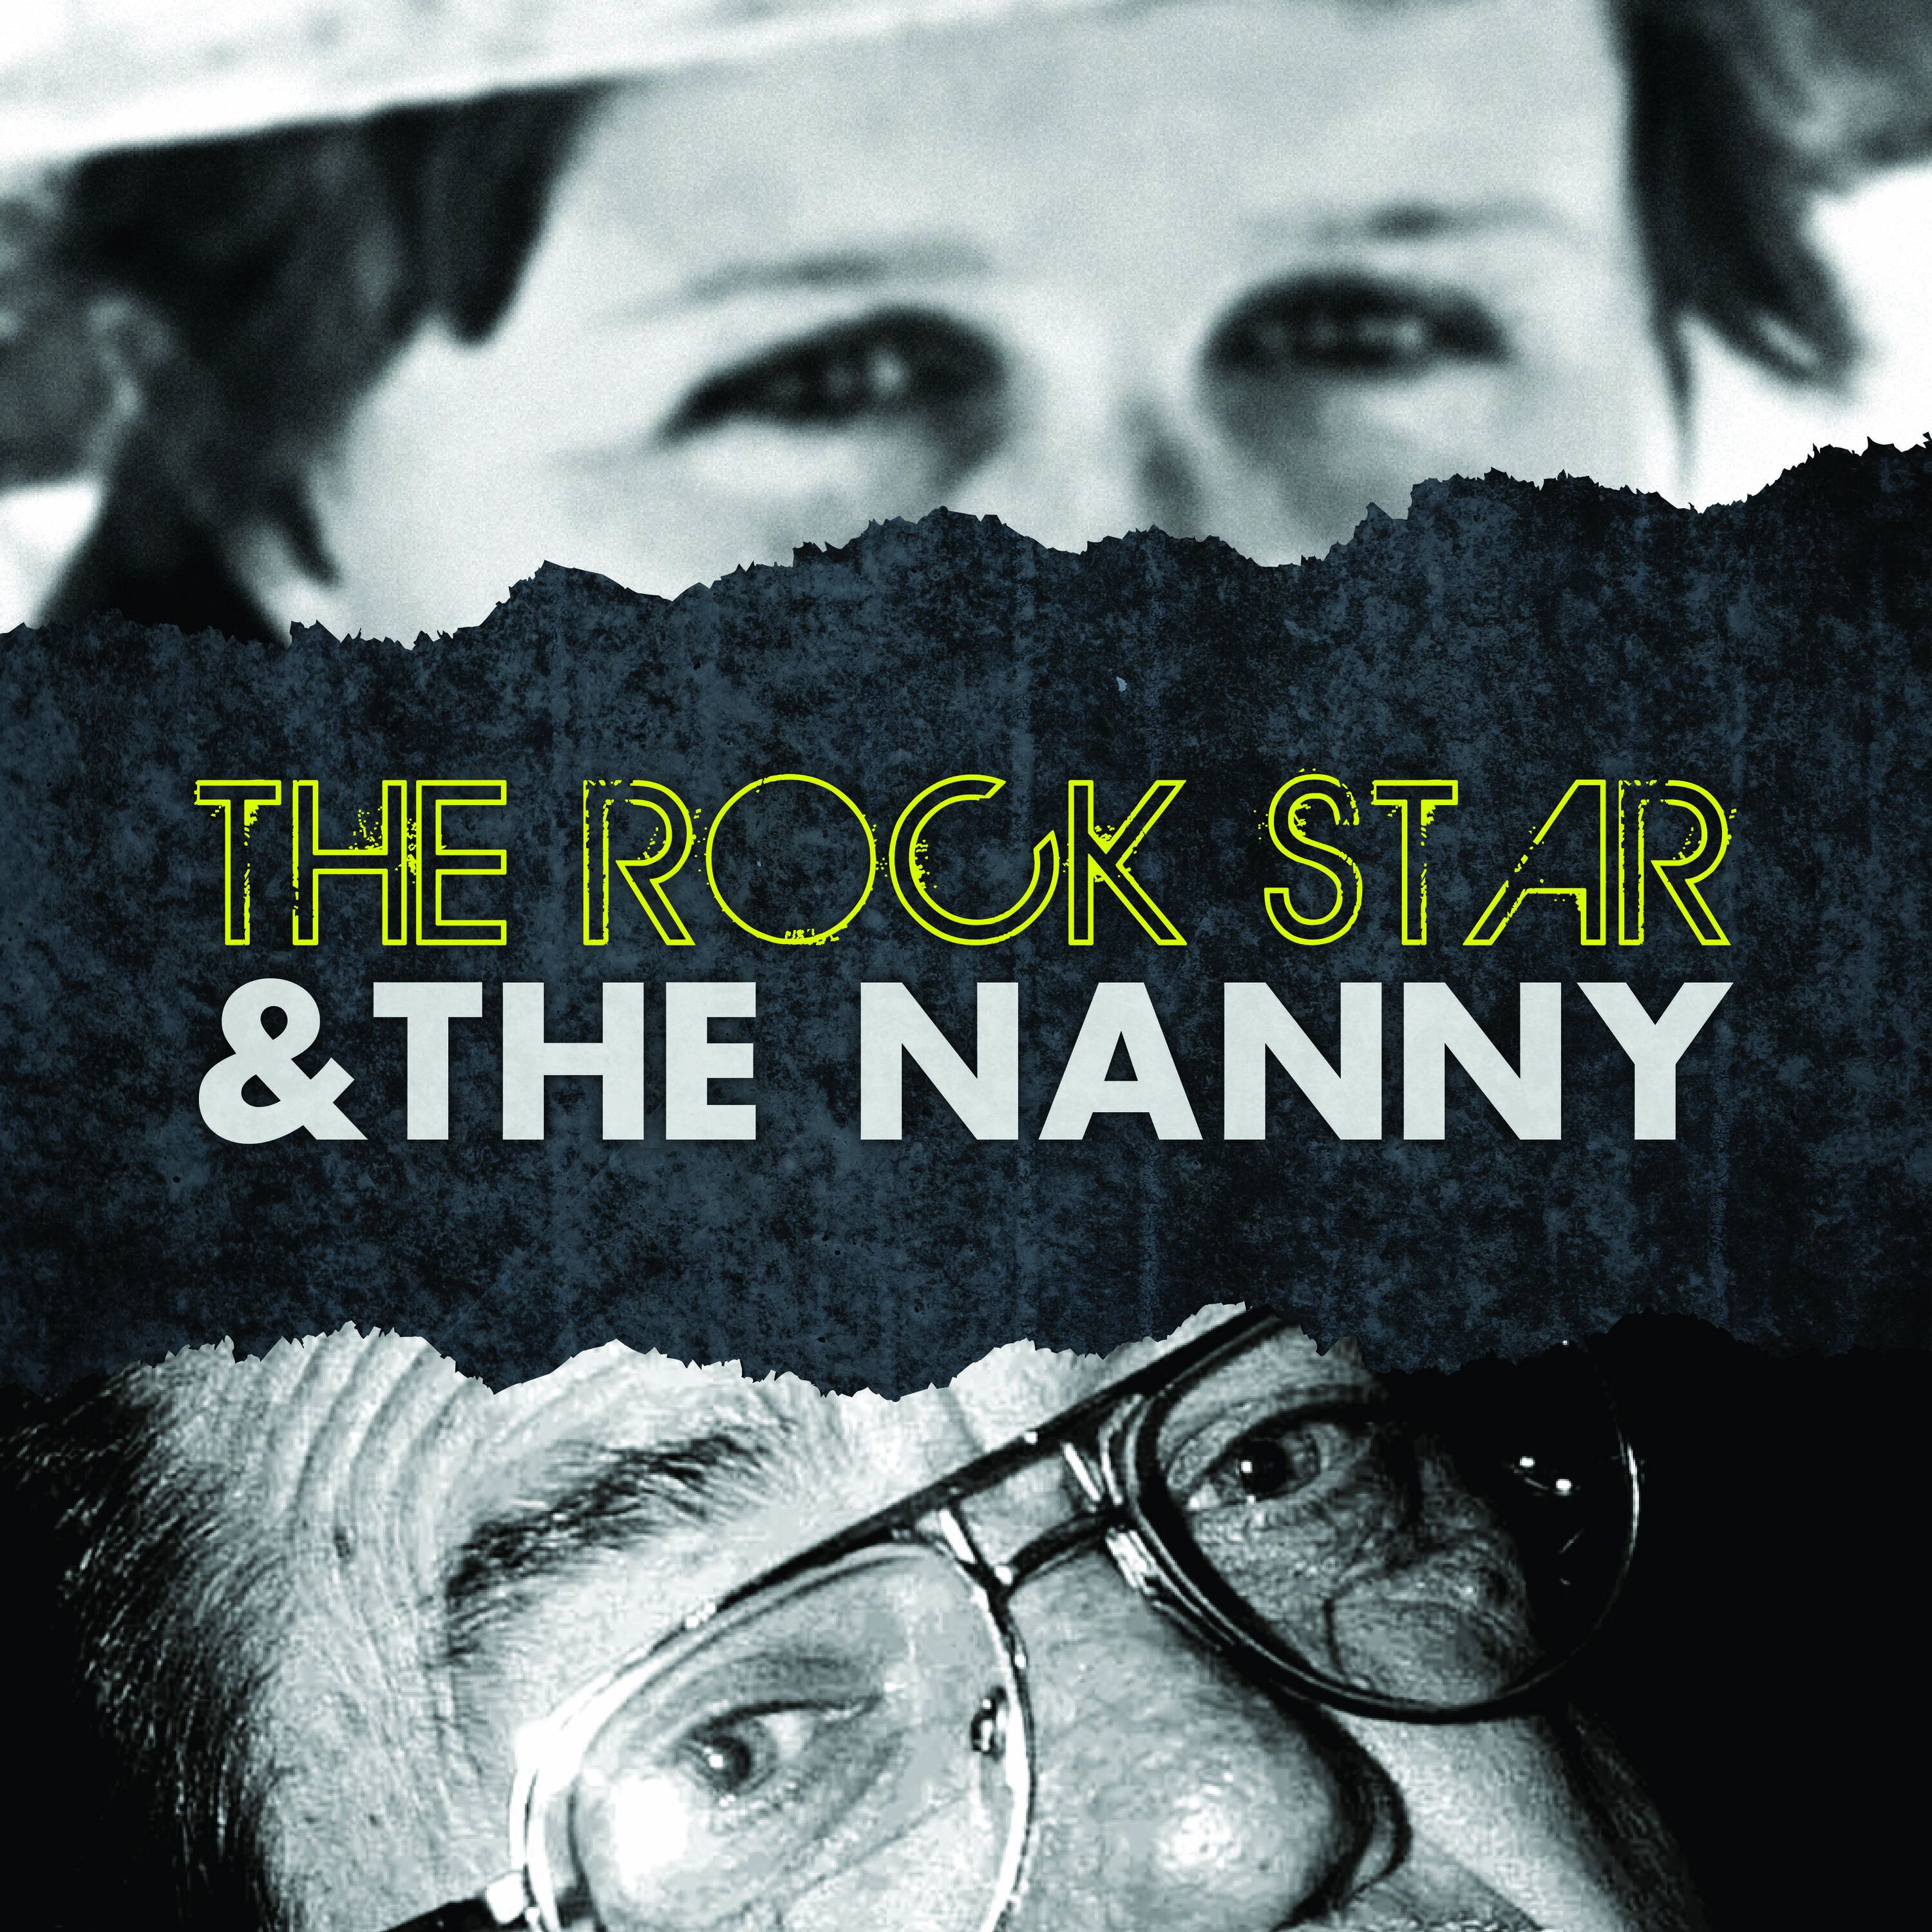 The Rock Star & The Nanny - Episode 2